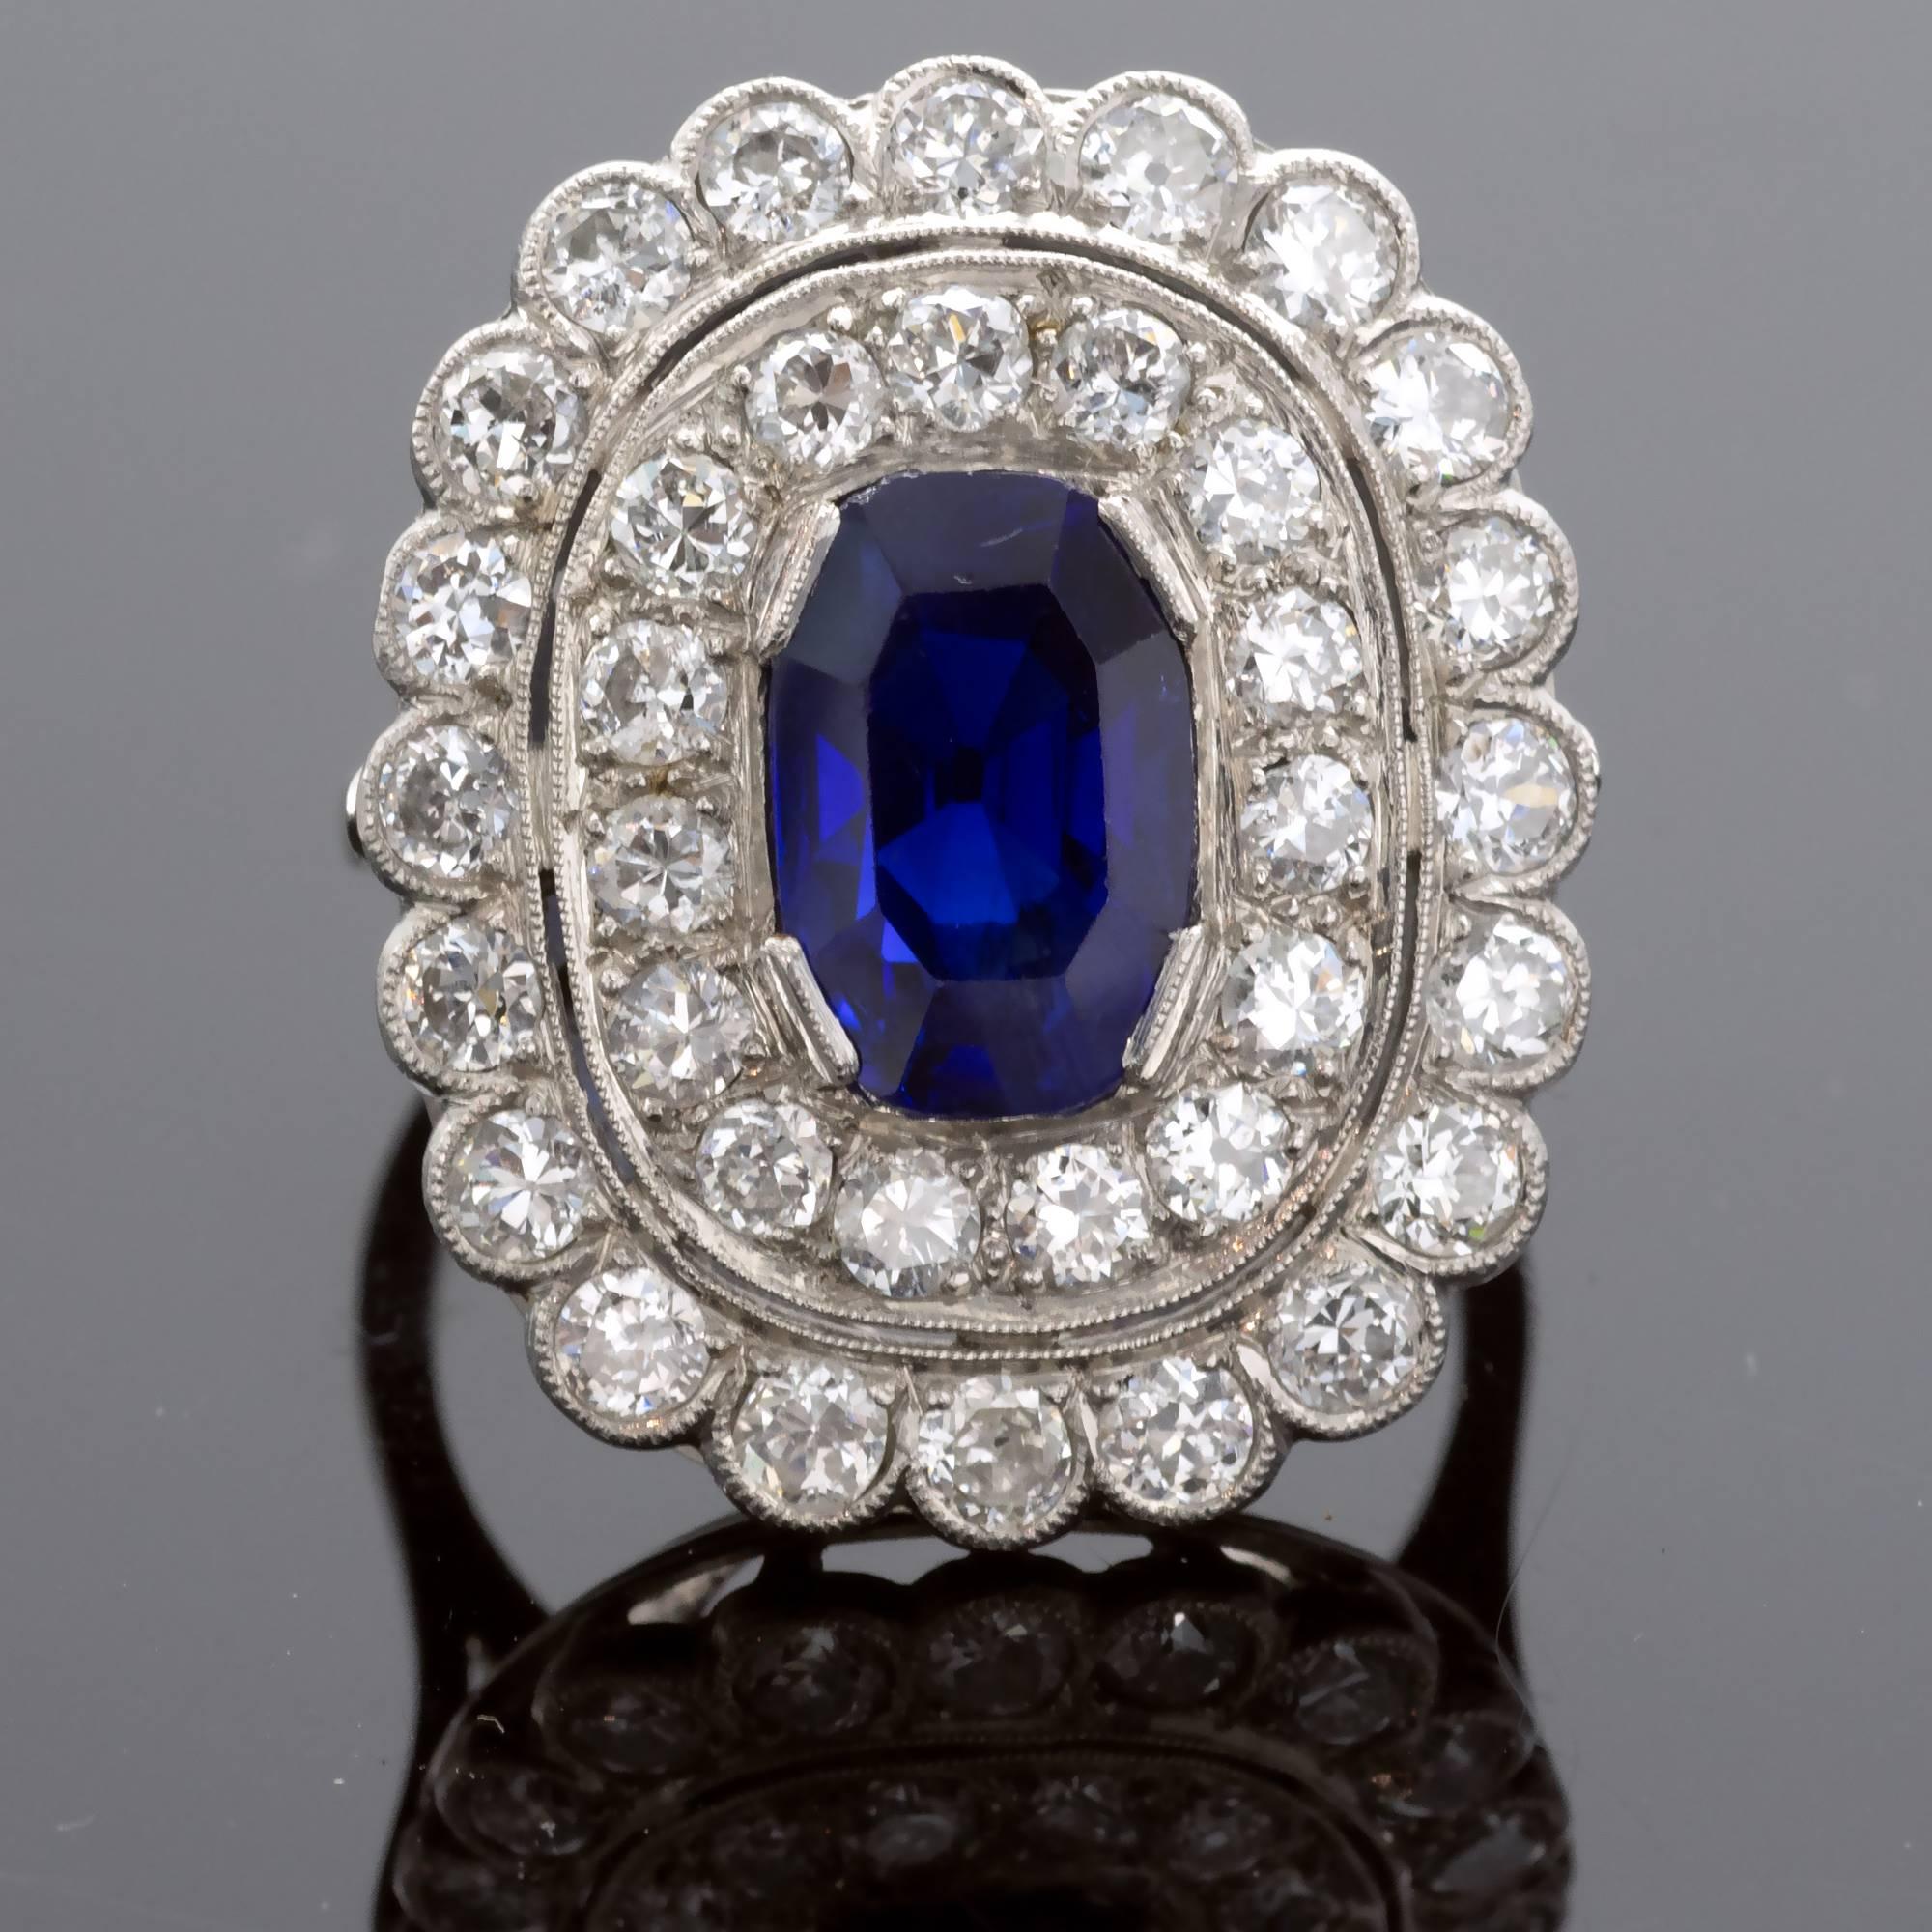 Exquisite Art Deco halo ring set in its center with a natural sapphire from Burma with a rich colour surrounded with two rows of diamonds. The ring comes with an renown AGL certificate  stating that the sapphire present no indication of heating or